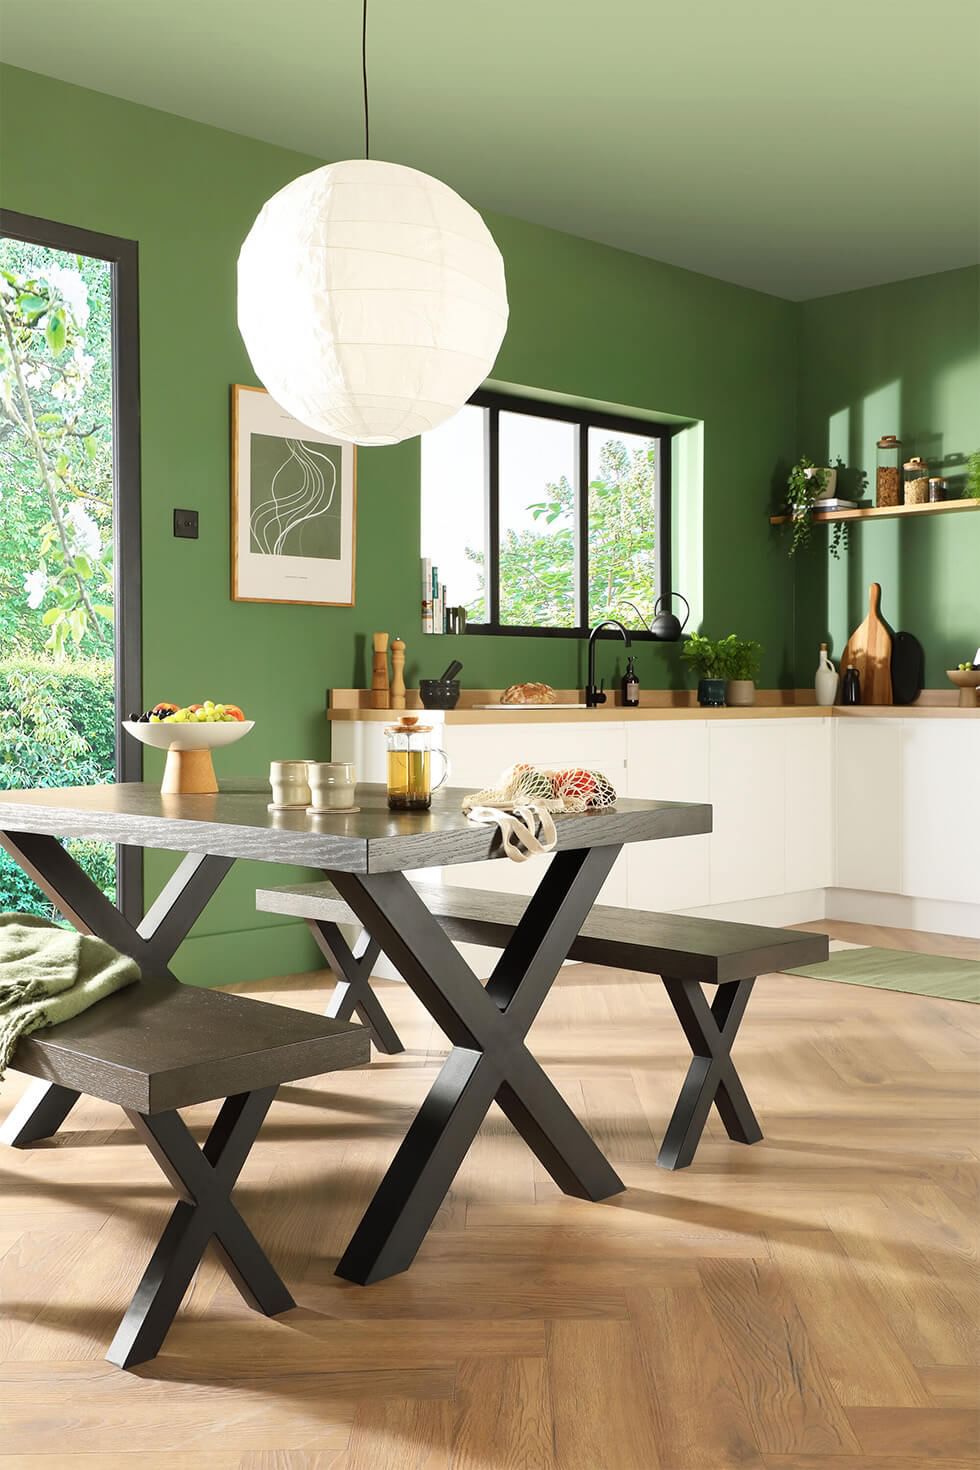 Forest green walls and grey dining set in kitchen-diner